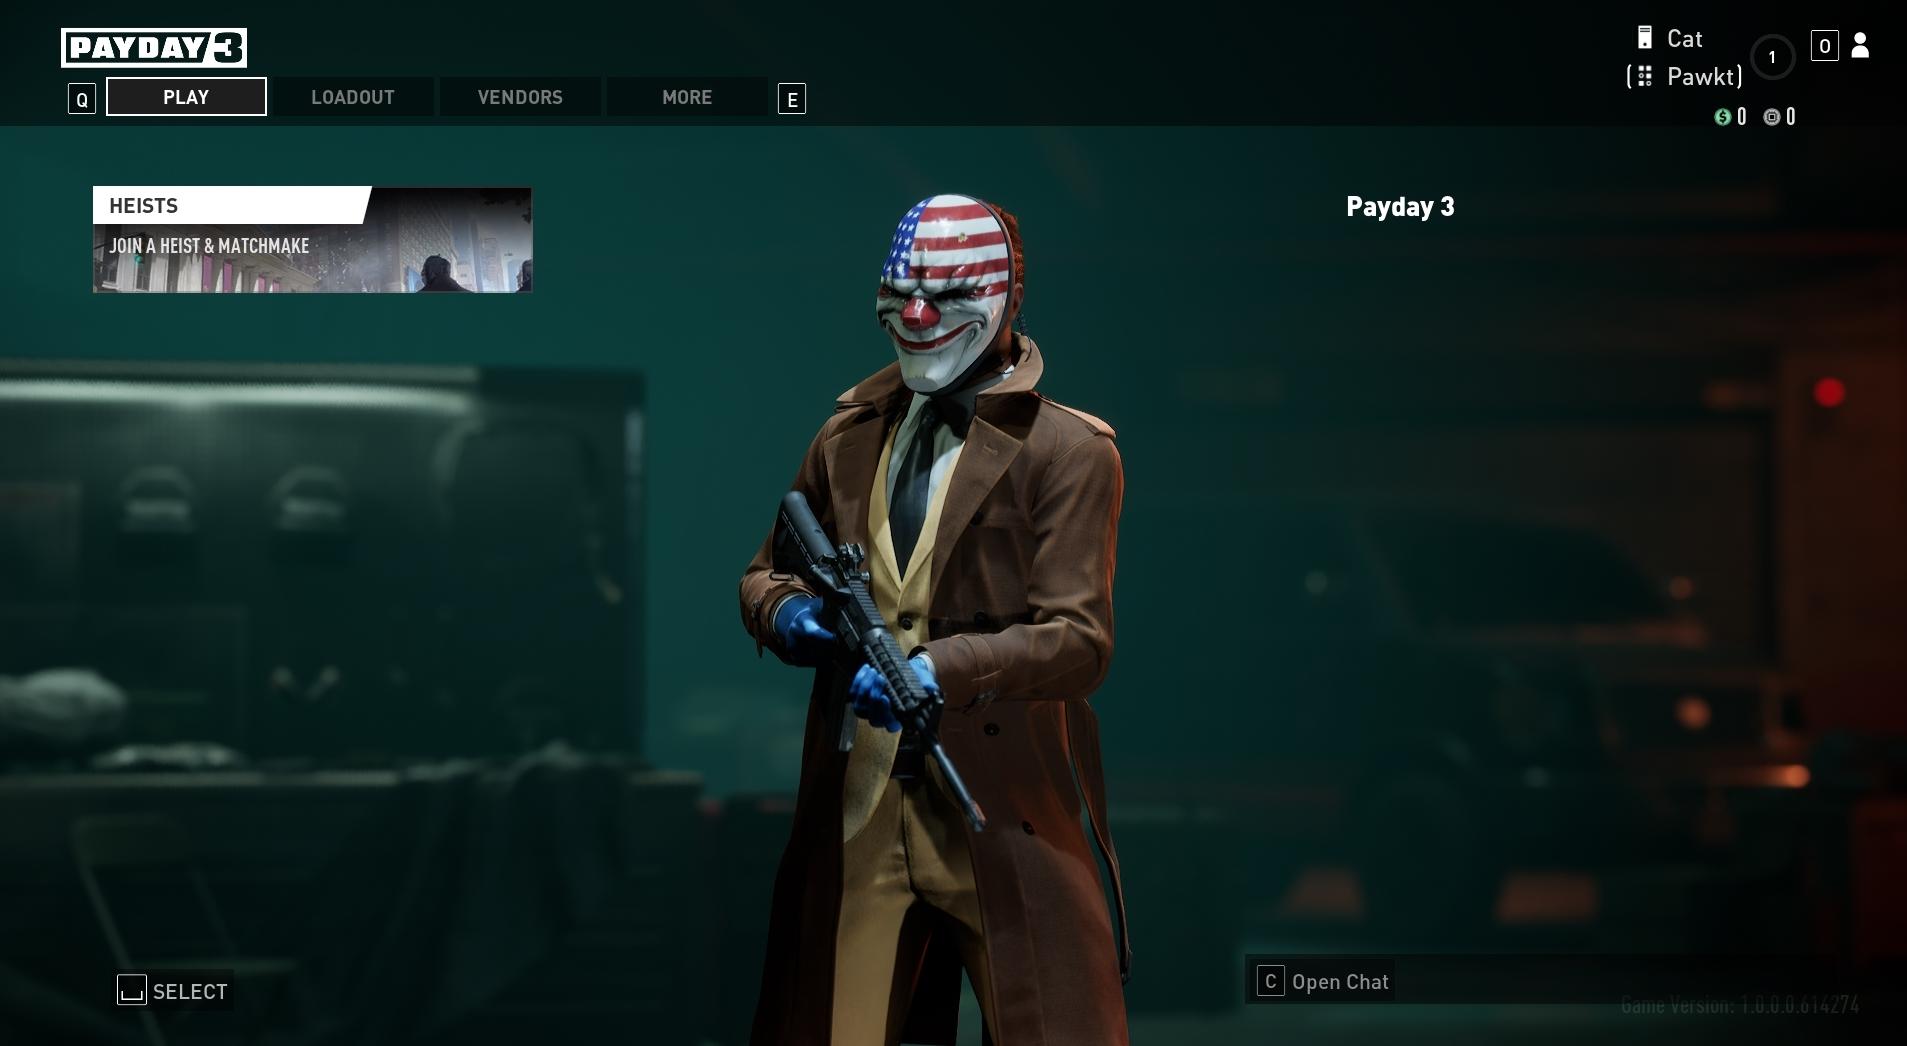 Payday 3 finally got some fire gameplay